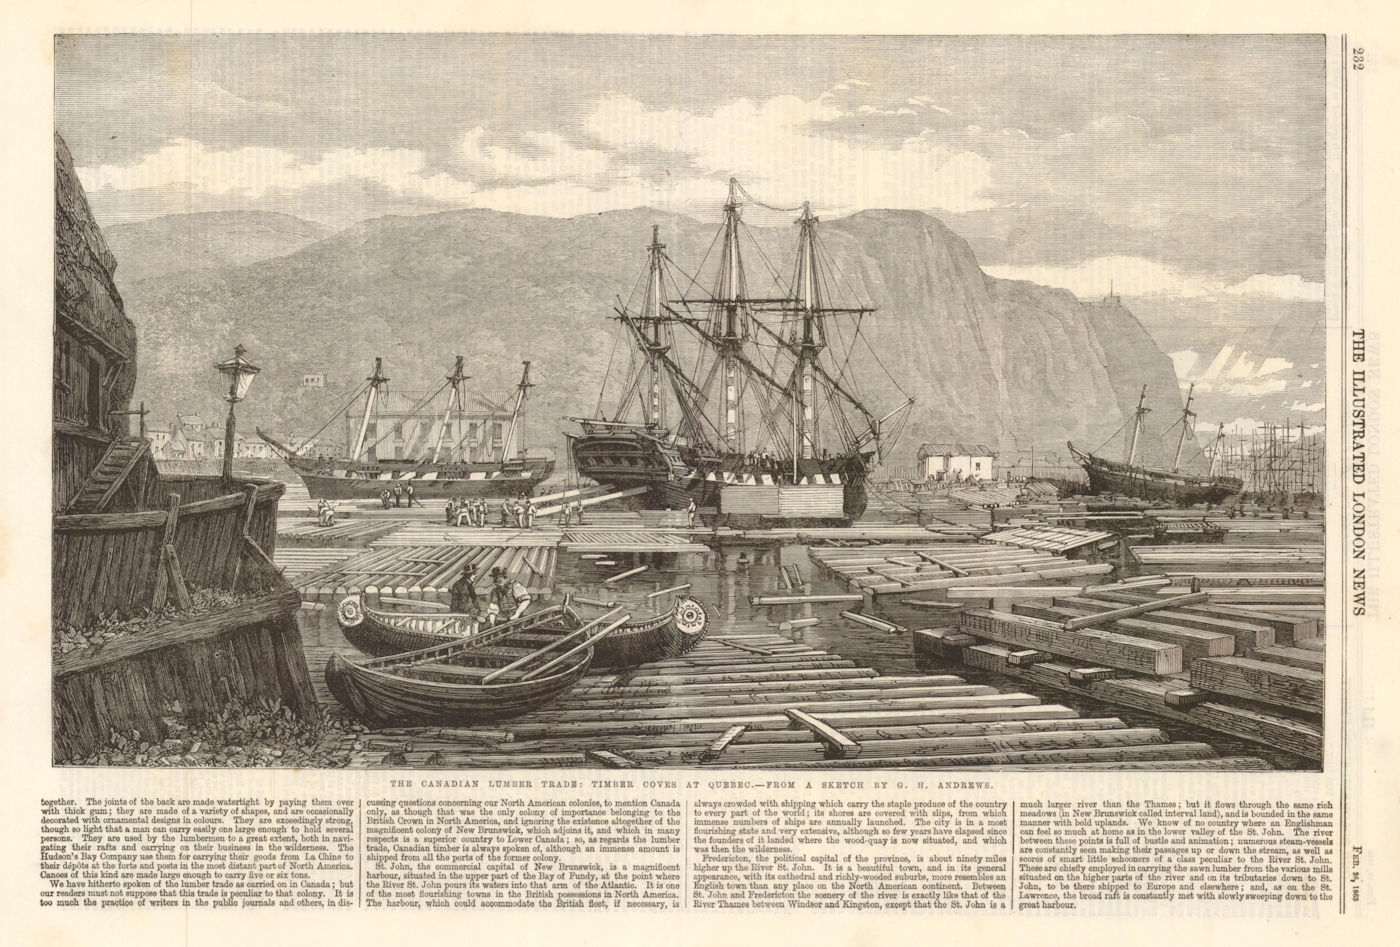 The Canadian Lumber trade: Timber coves at Quebec. Canada 1863 old print